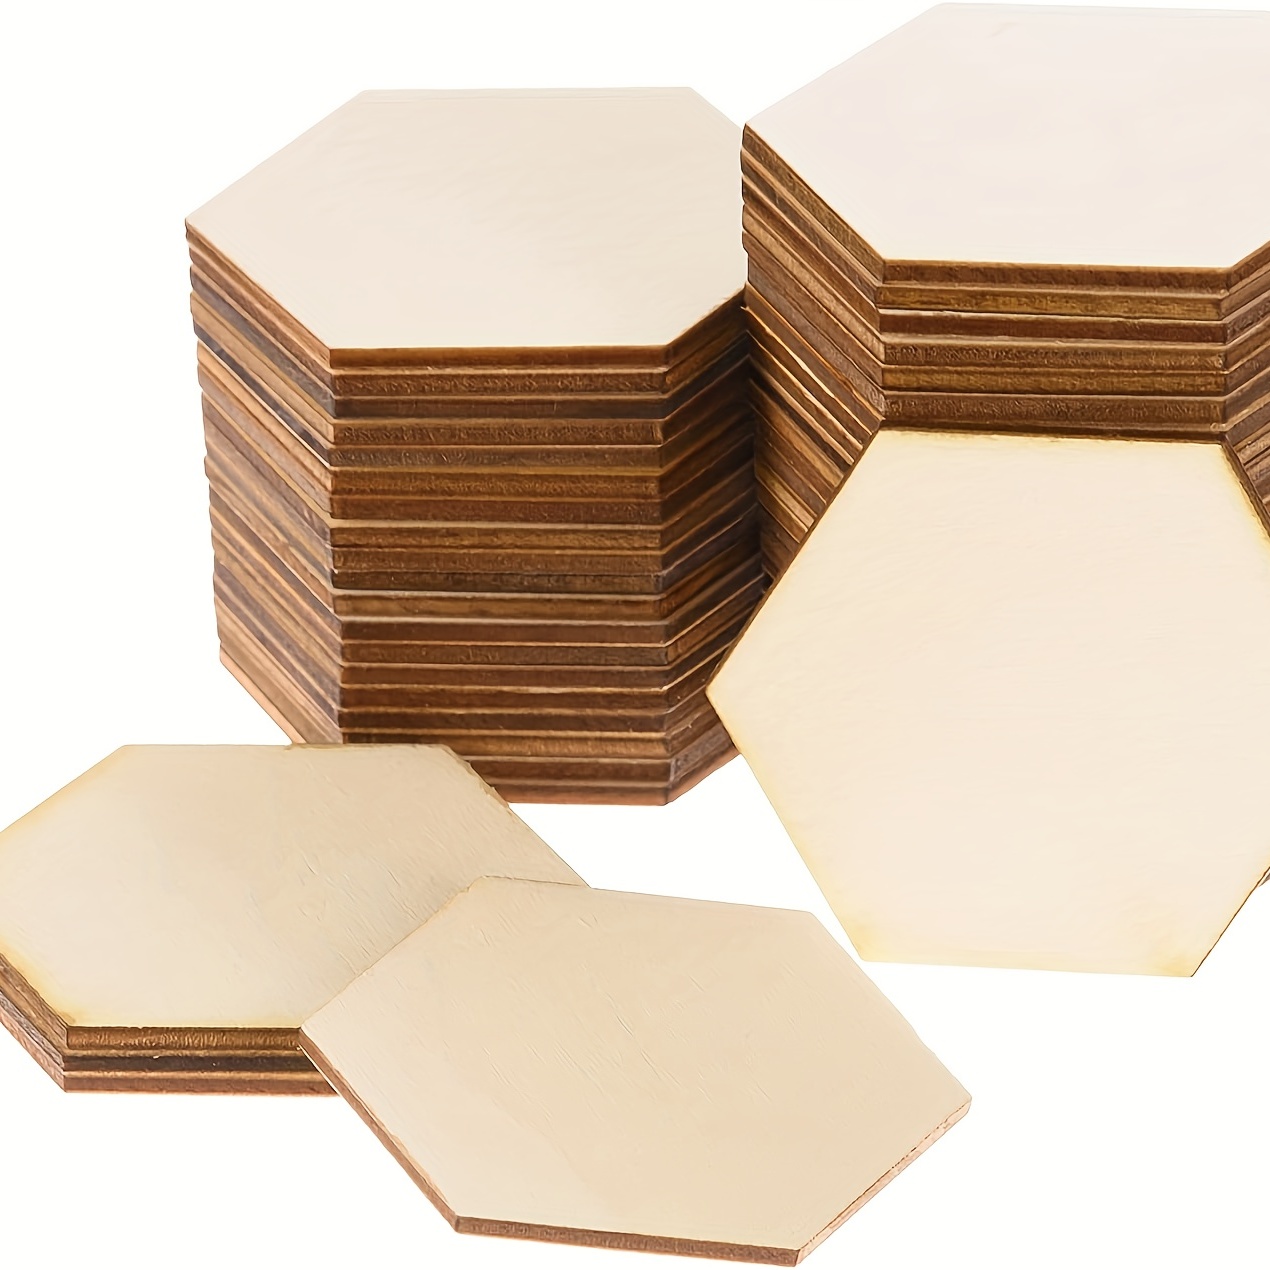 60 Pcs Unfinished Hexagon Wood Pieces Blank Wooden Hexagon Shape Cutouts  Slice Wooden Tile Slabs Cutouts for DIY Crafts Painting Staining Coaster